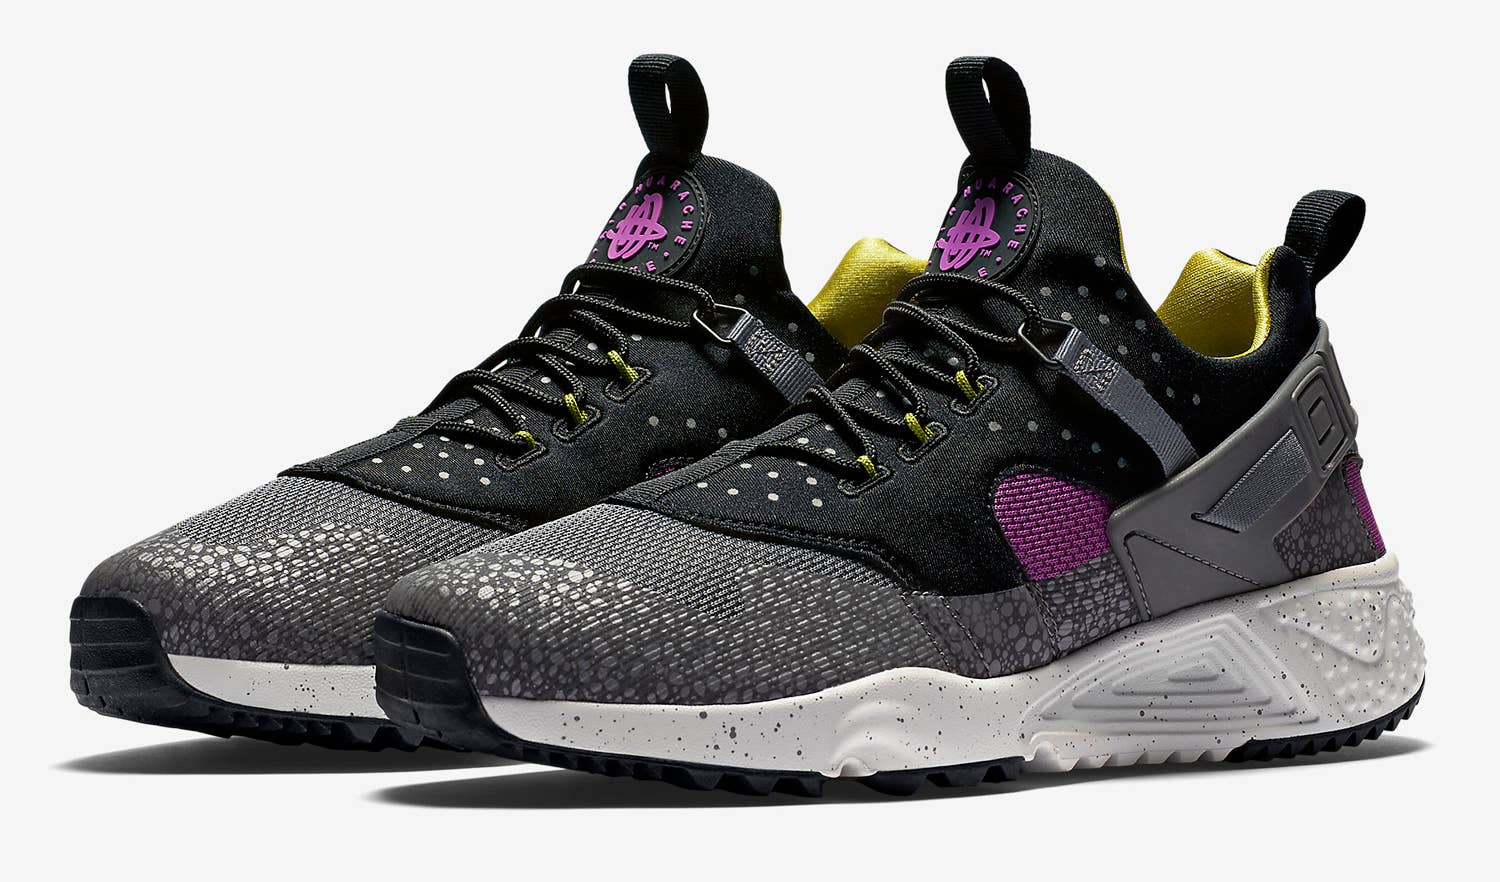 heden Airco Broer Nike Already Made Safari Versions of Its New Huarache | Complex